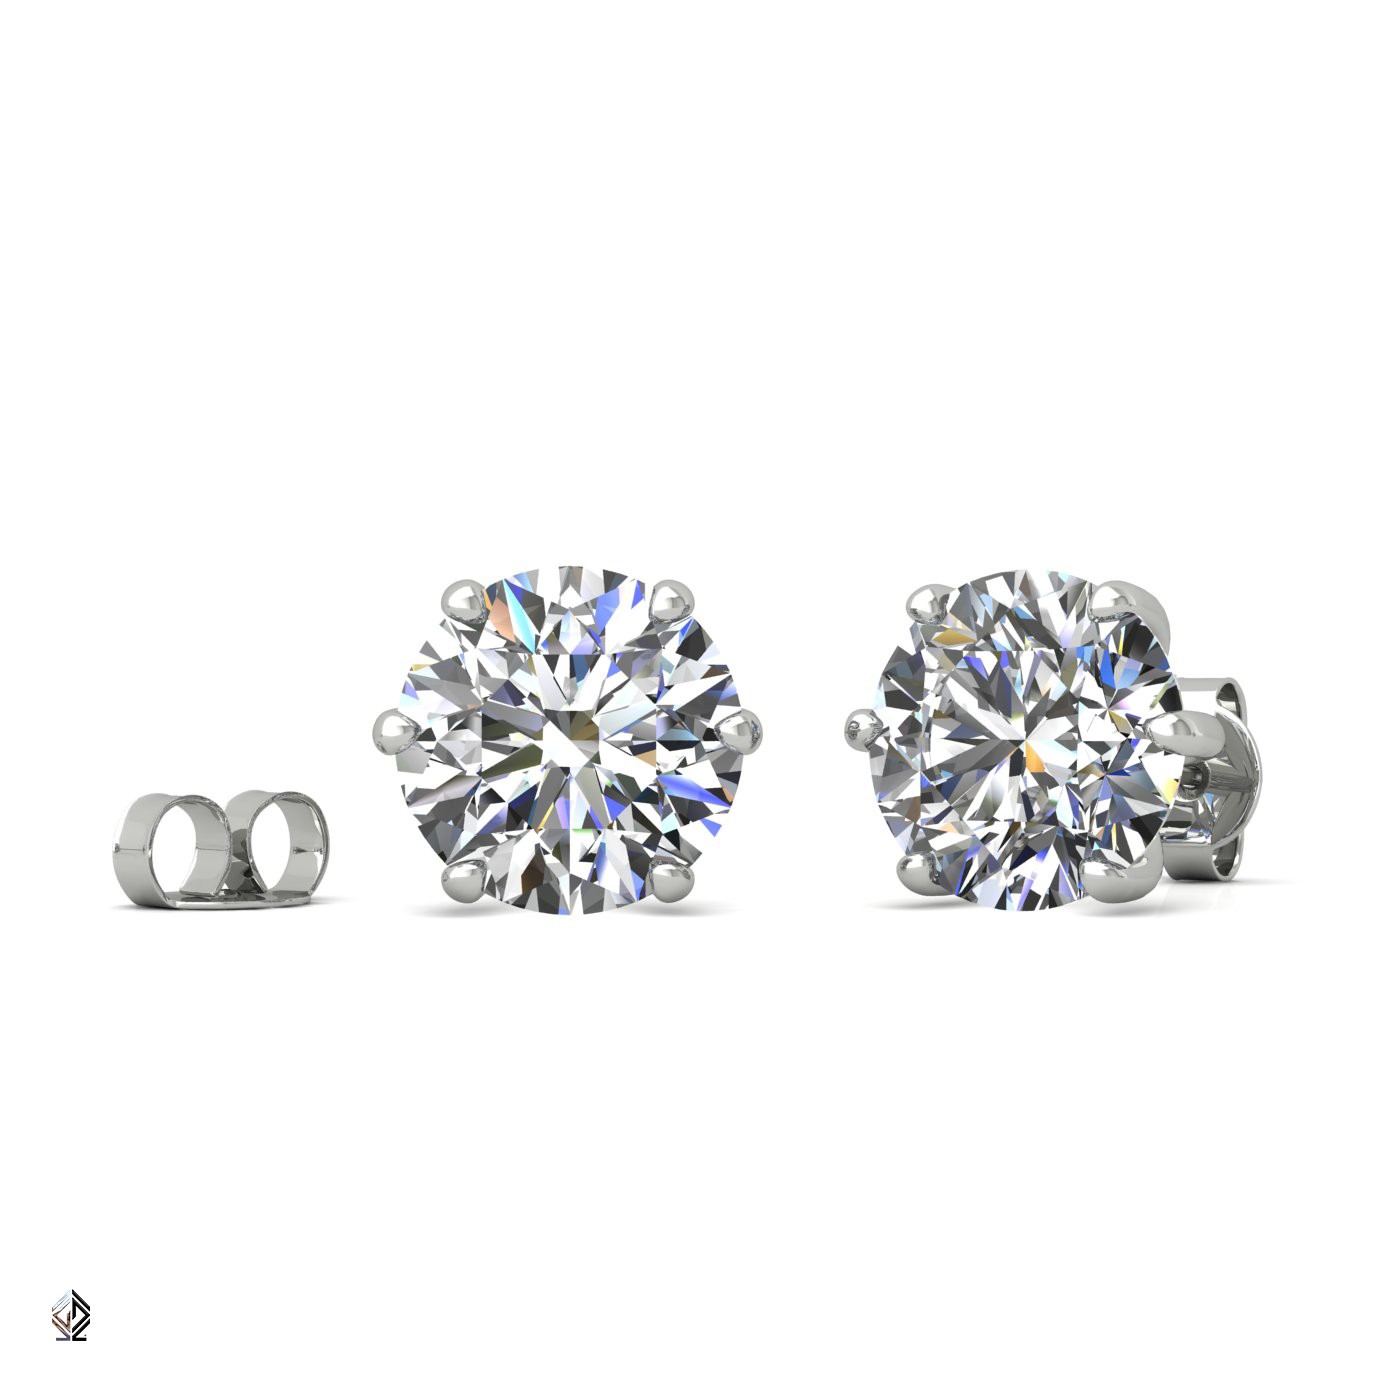 18k white gold 1.5 ct each (3,0 tcw) 6 prongs round shape diamond earrings Photos & images